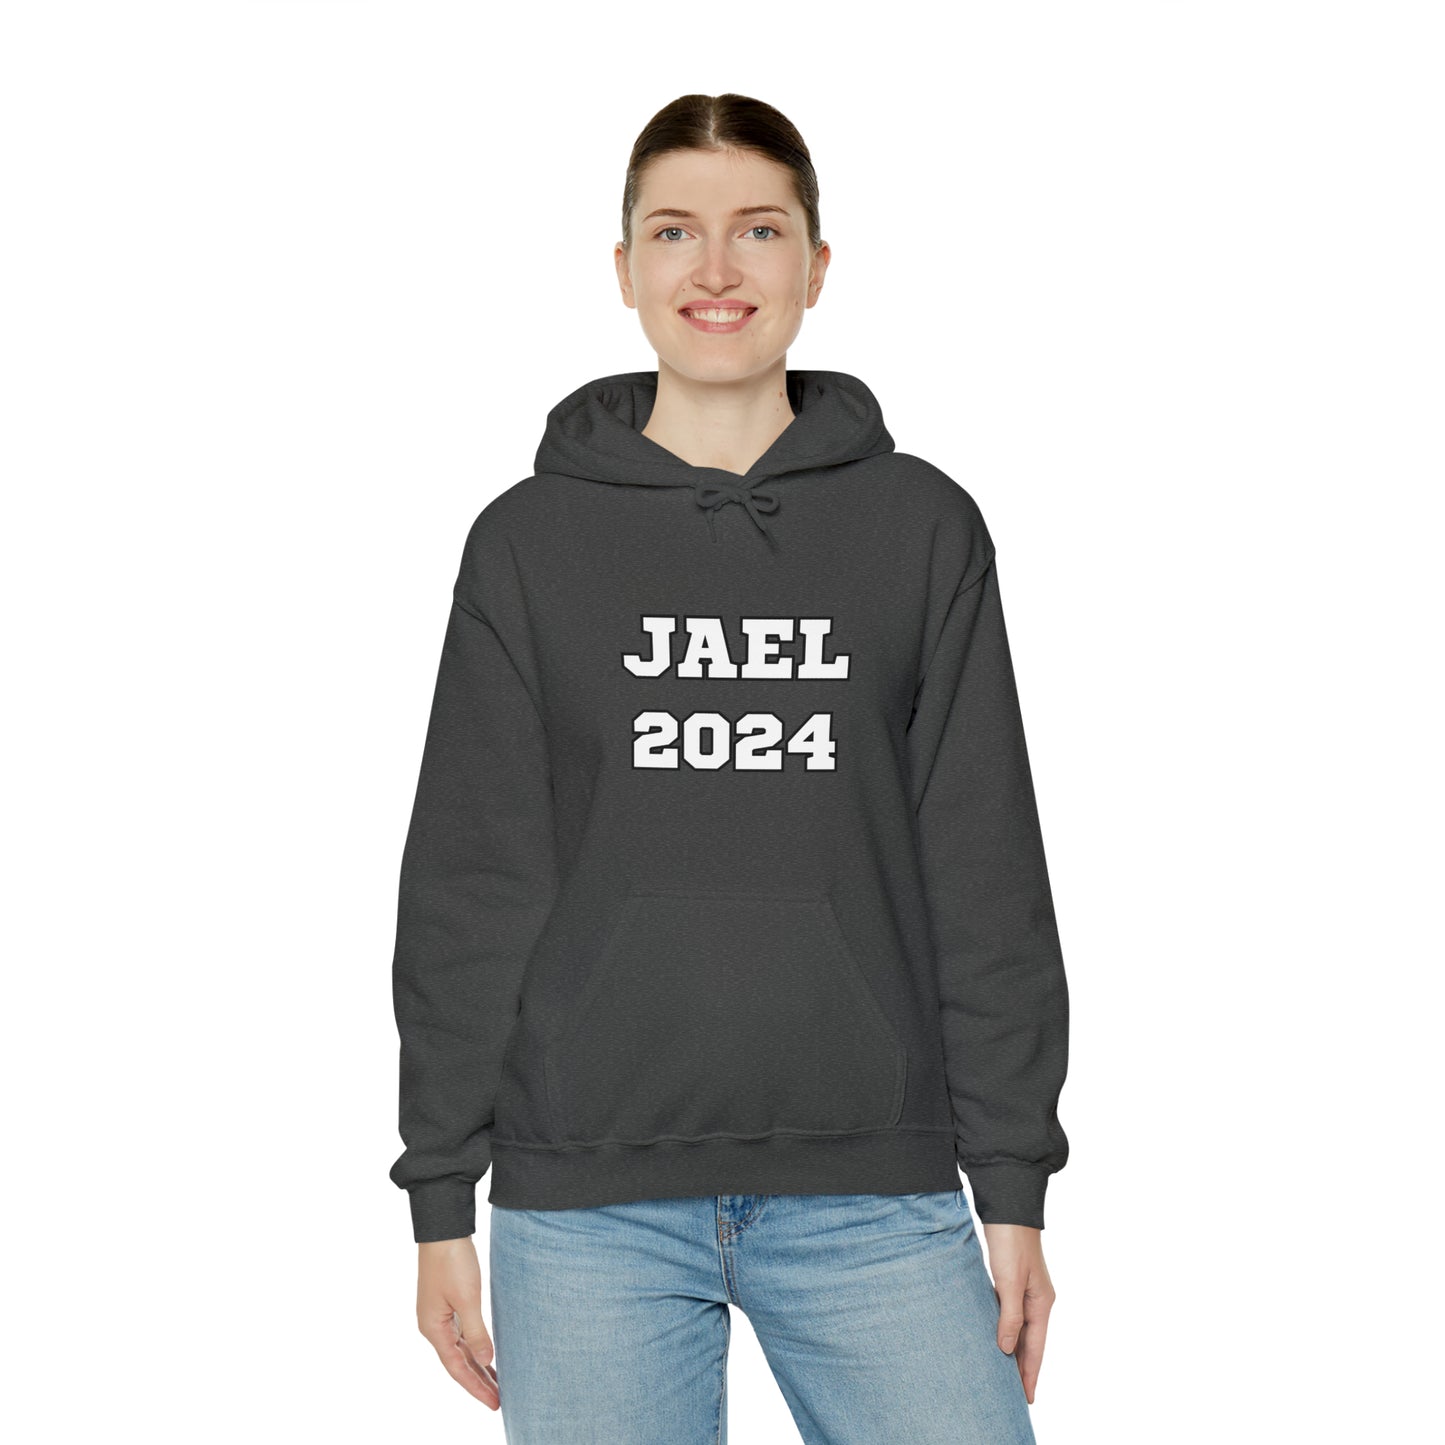 Jael 2024 Hooded Sweatshirt Jael Shirt Jael Hoodie Seminarian Gift for Pastor Gift for Minister Gift for Clergy Gift